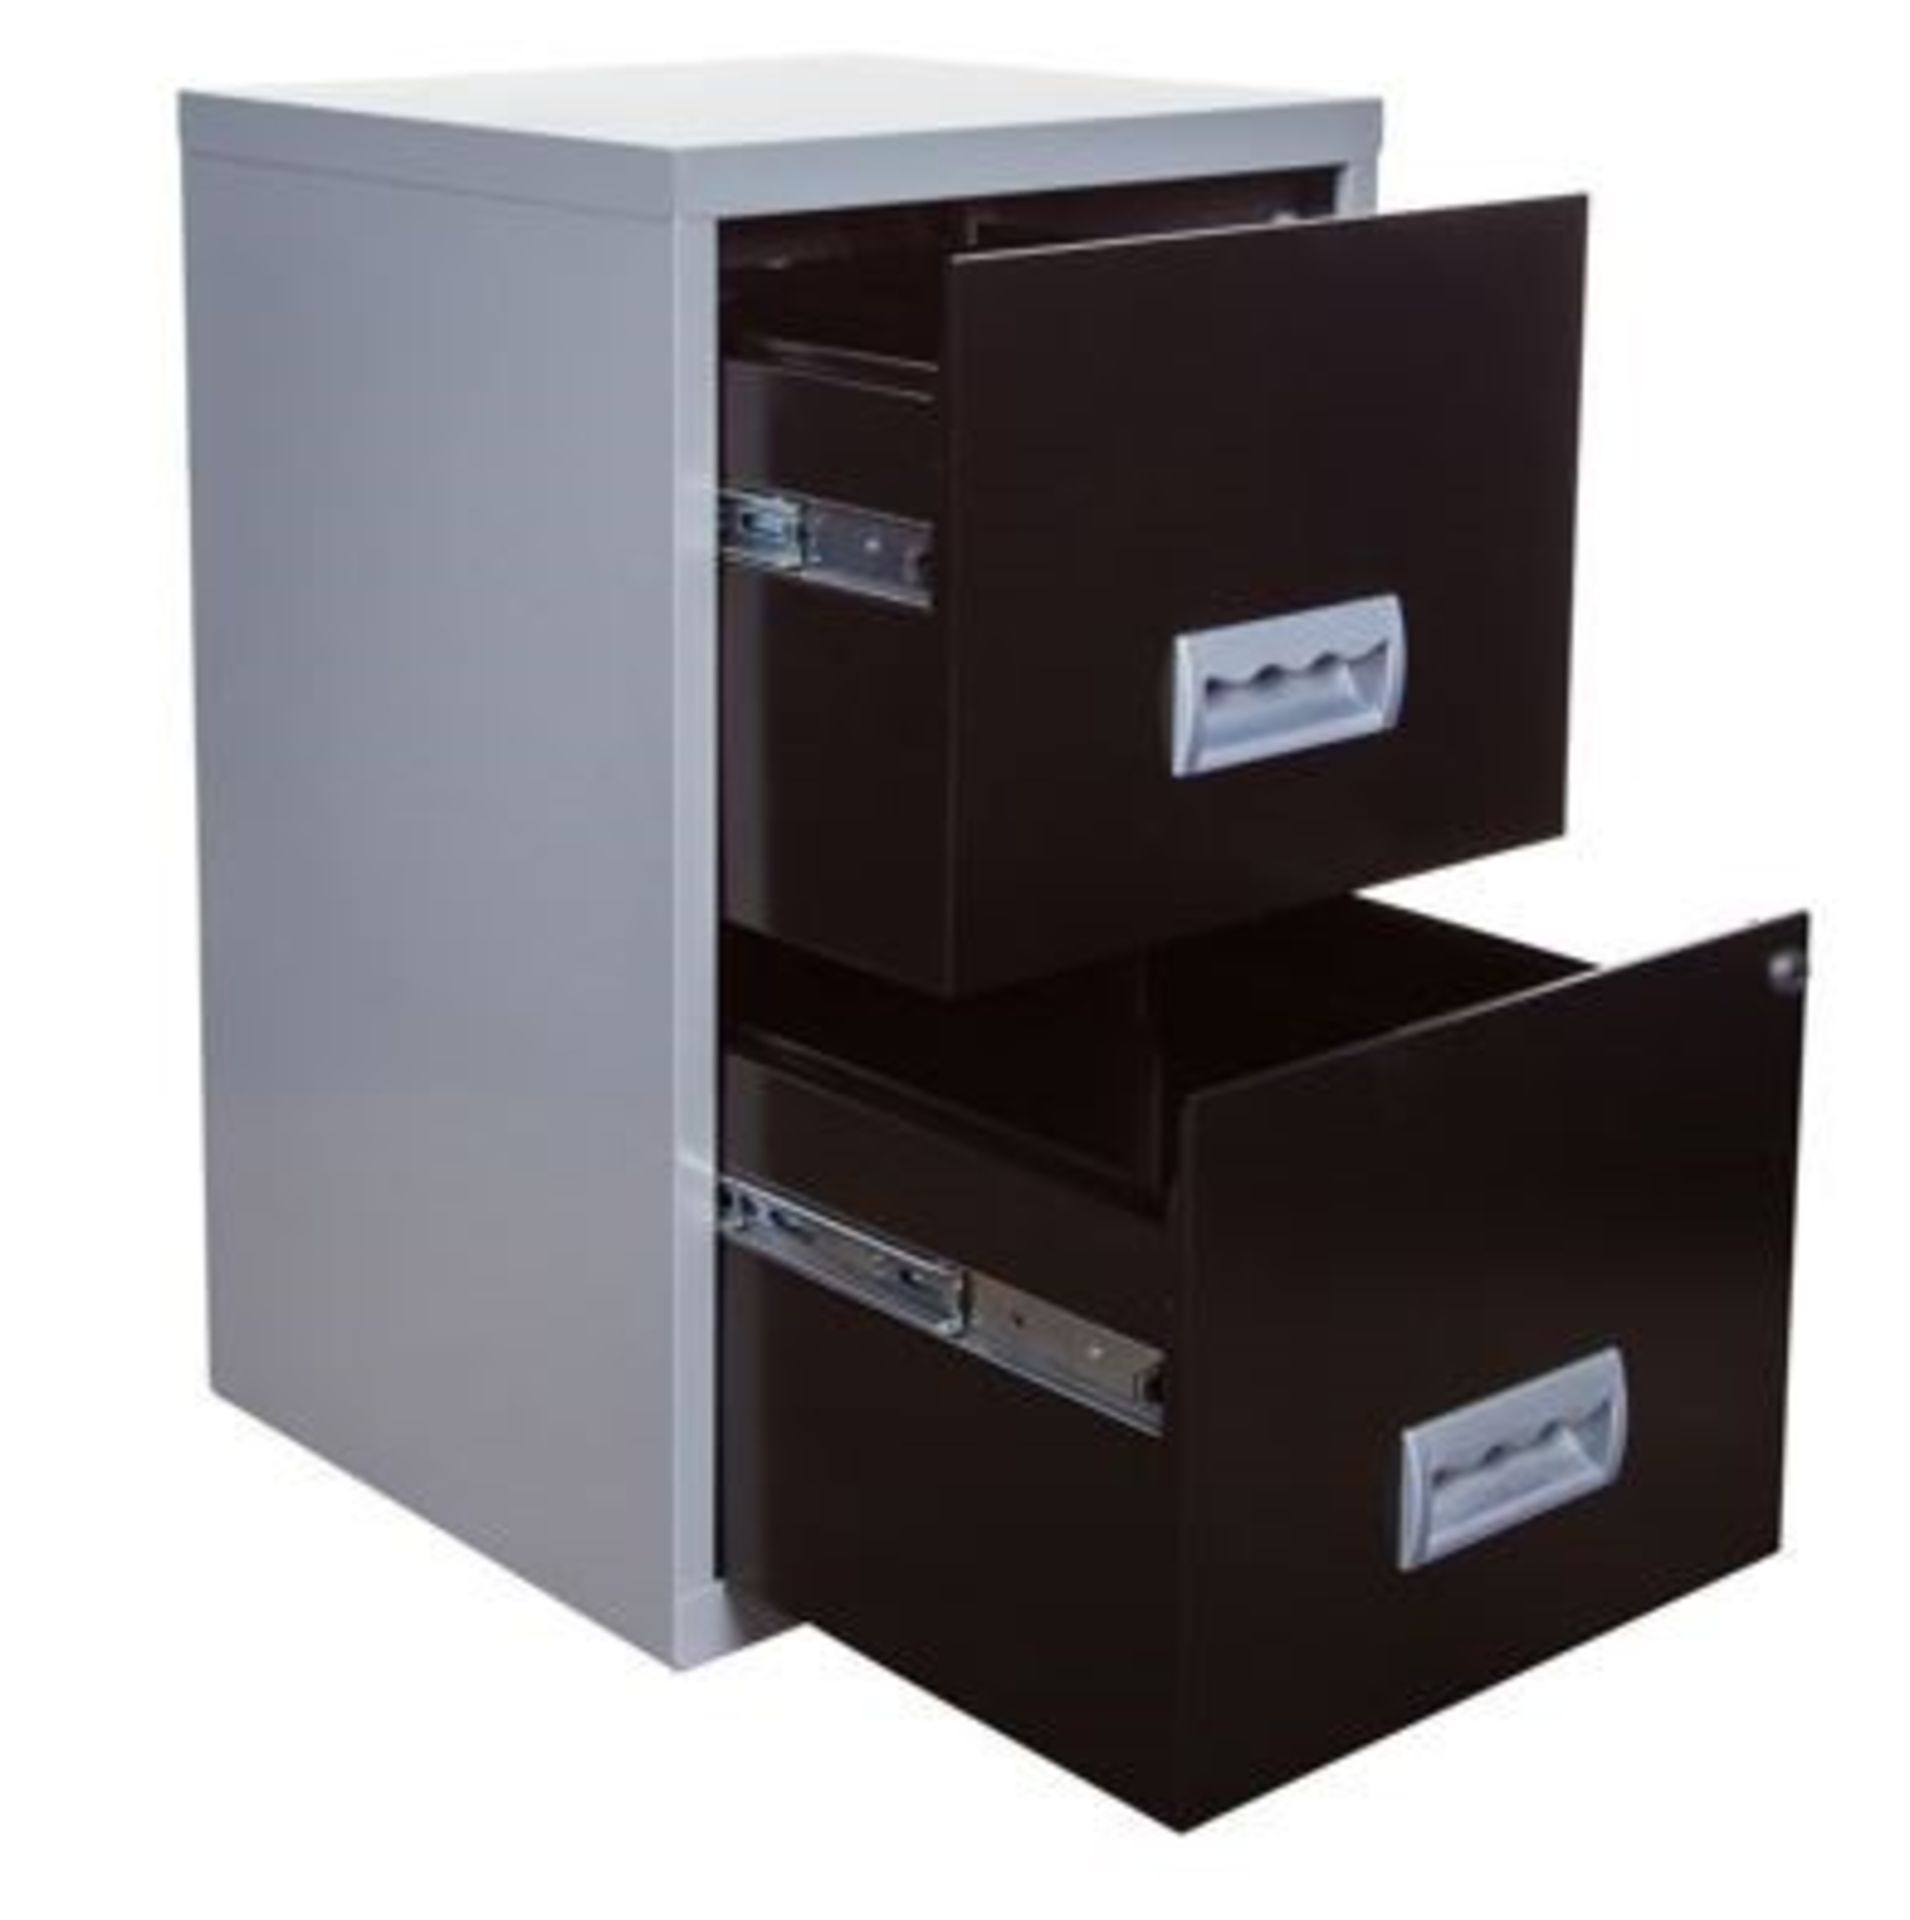 1 2 DRAWER SILVER AND BLACK FILING CABINET / P/N -